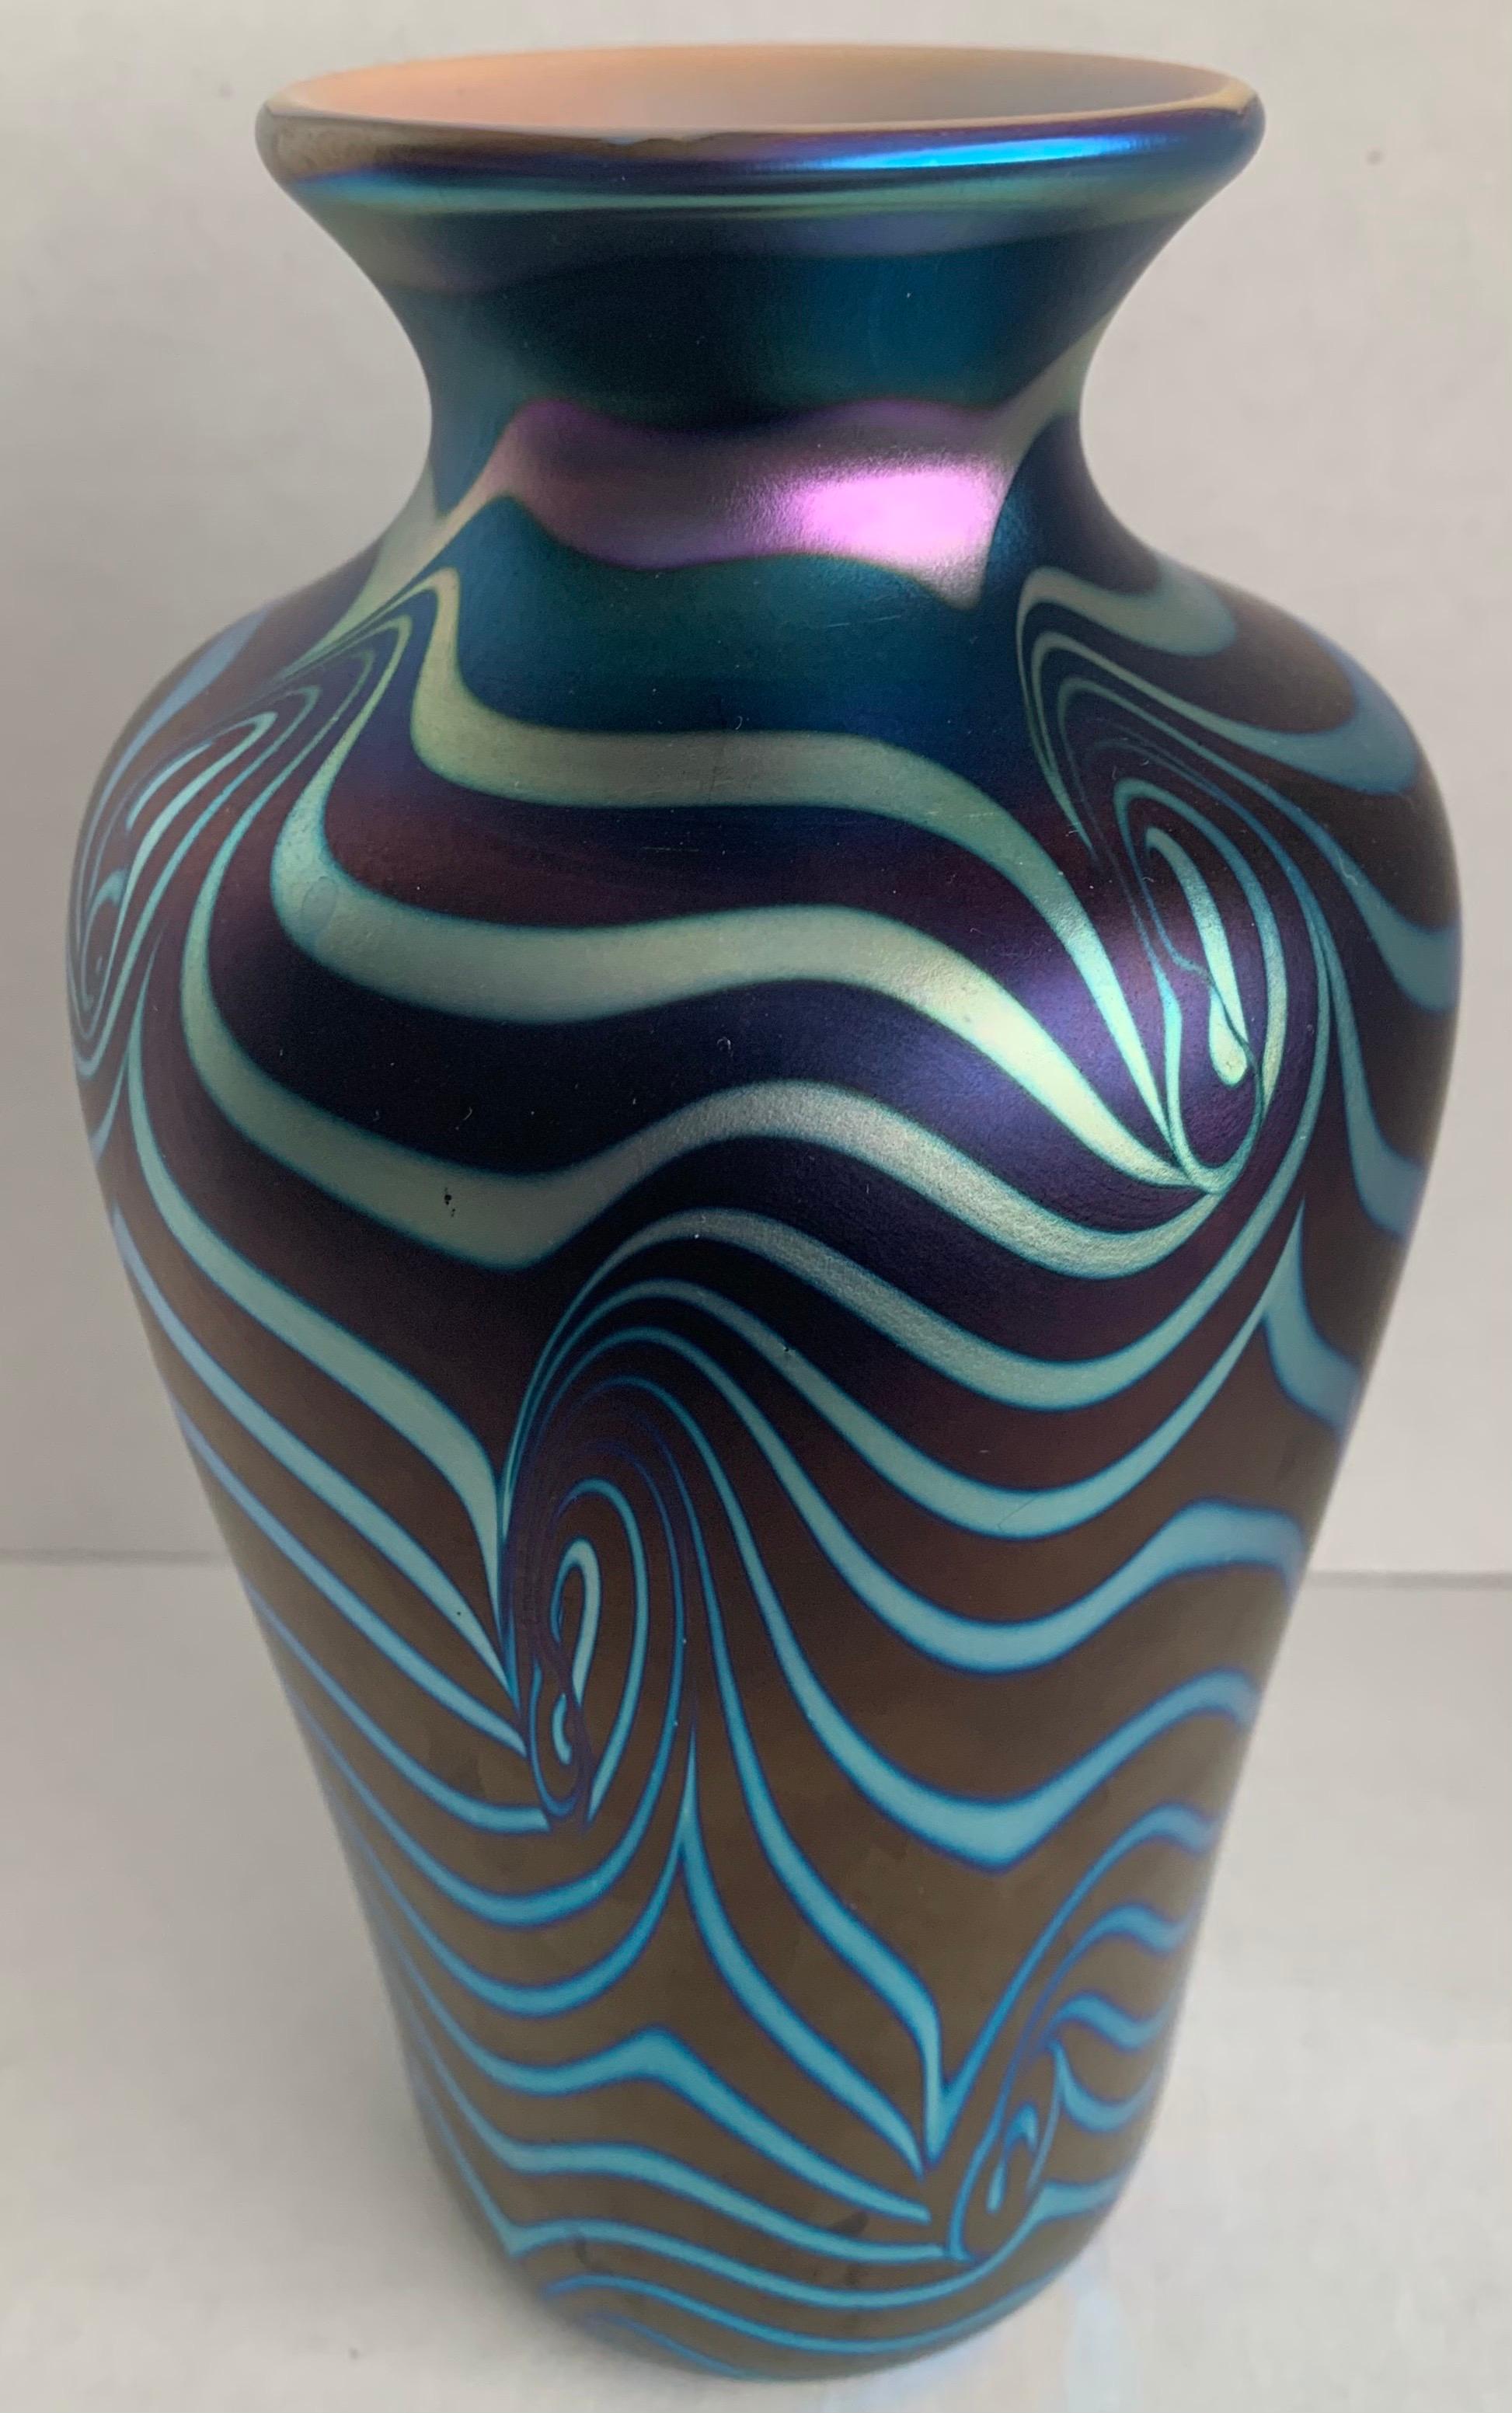 1977 Carlson blown glass lustre vase. Iridescent dark blue background with green lustre swirls throughout. Etched signature on the underside.